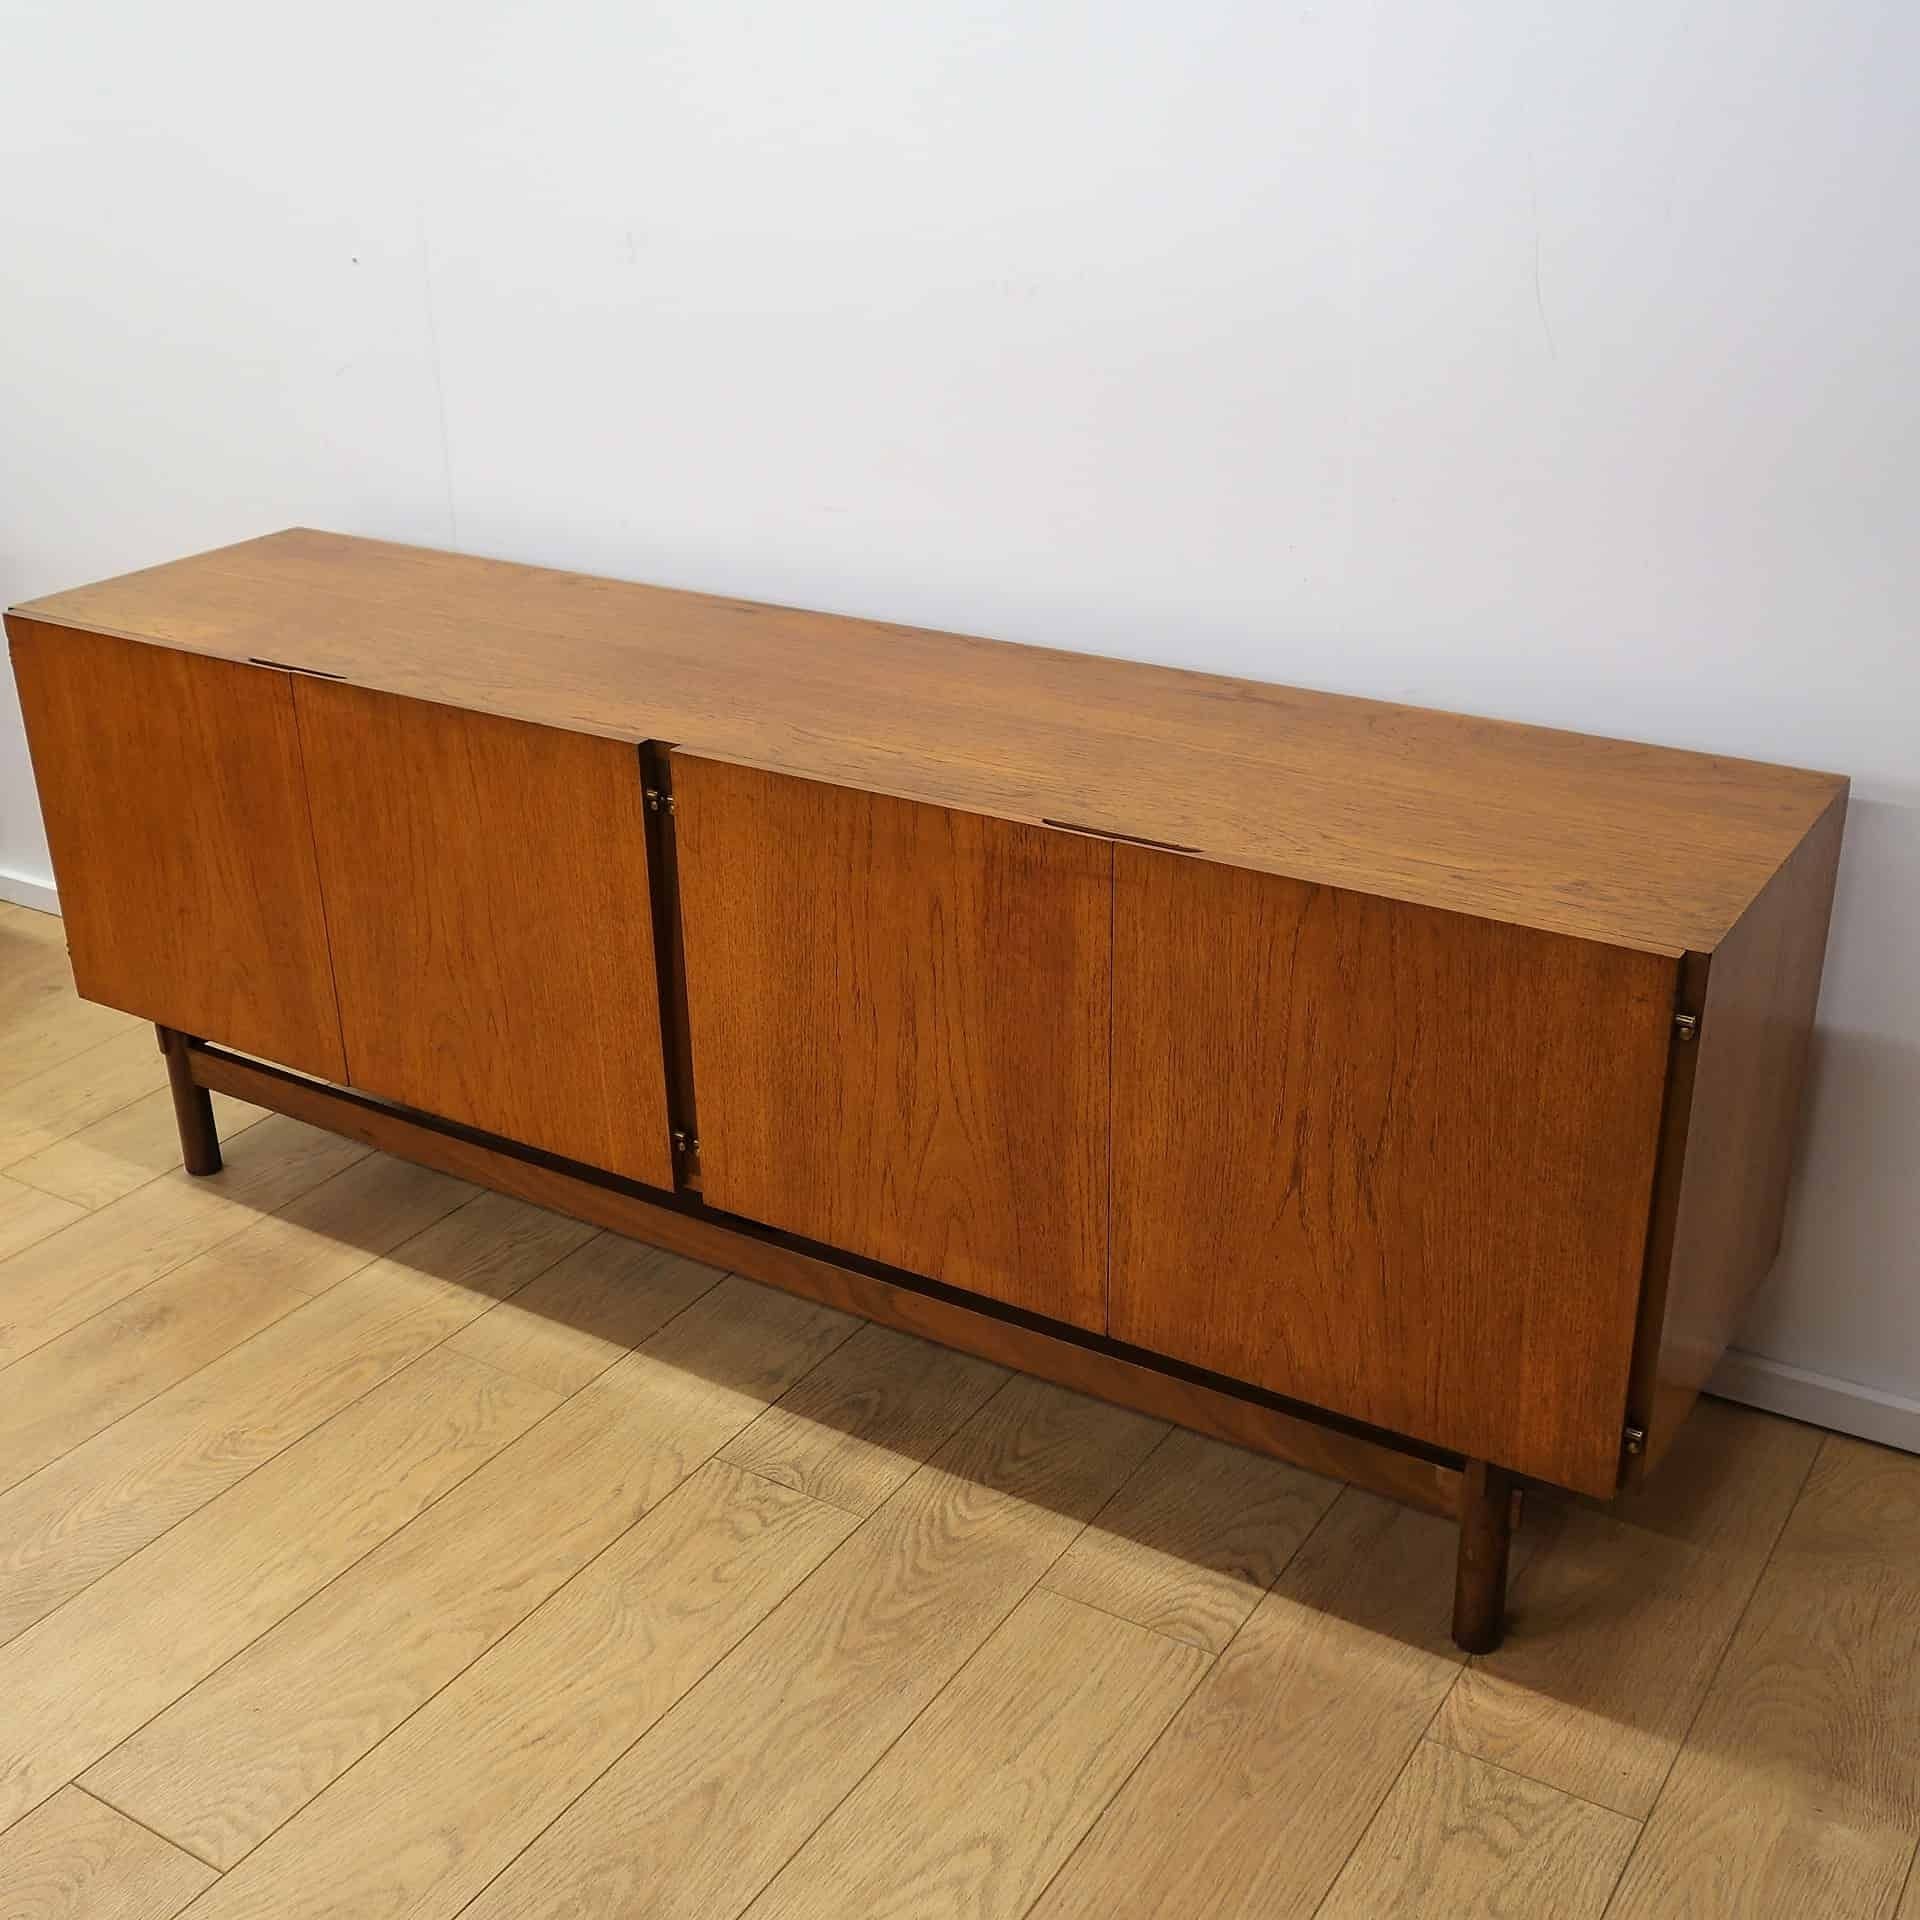 1960s Teak Sideboardvanson – Mark Parrish Mid Century Modern Intended For Parrish Sideboards (View 5 of 30)